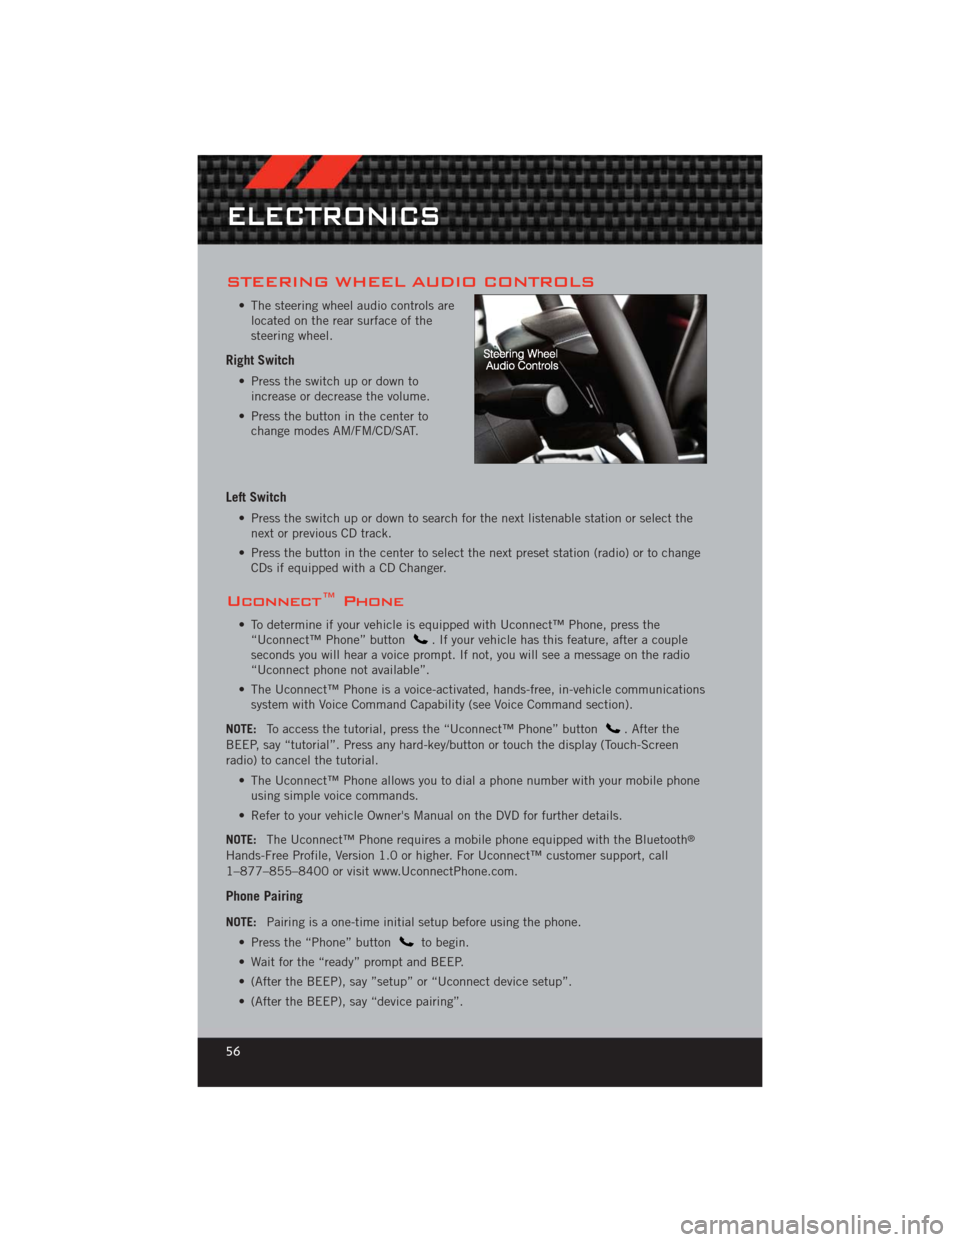 DODGE CHALLENGER 2012 3.G User Guide STEERING WHEEL AUDIO CONTROLS
• The steering wheel audio controls arelocated on the rear surface of the
steering wheel.
Right Switch
• Press the switch up or down toincrease or decrease the volume